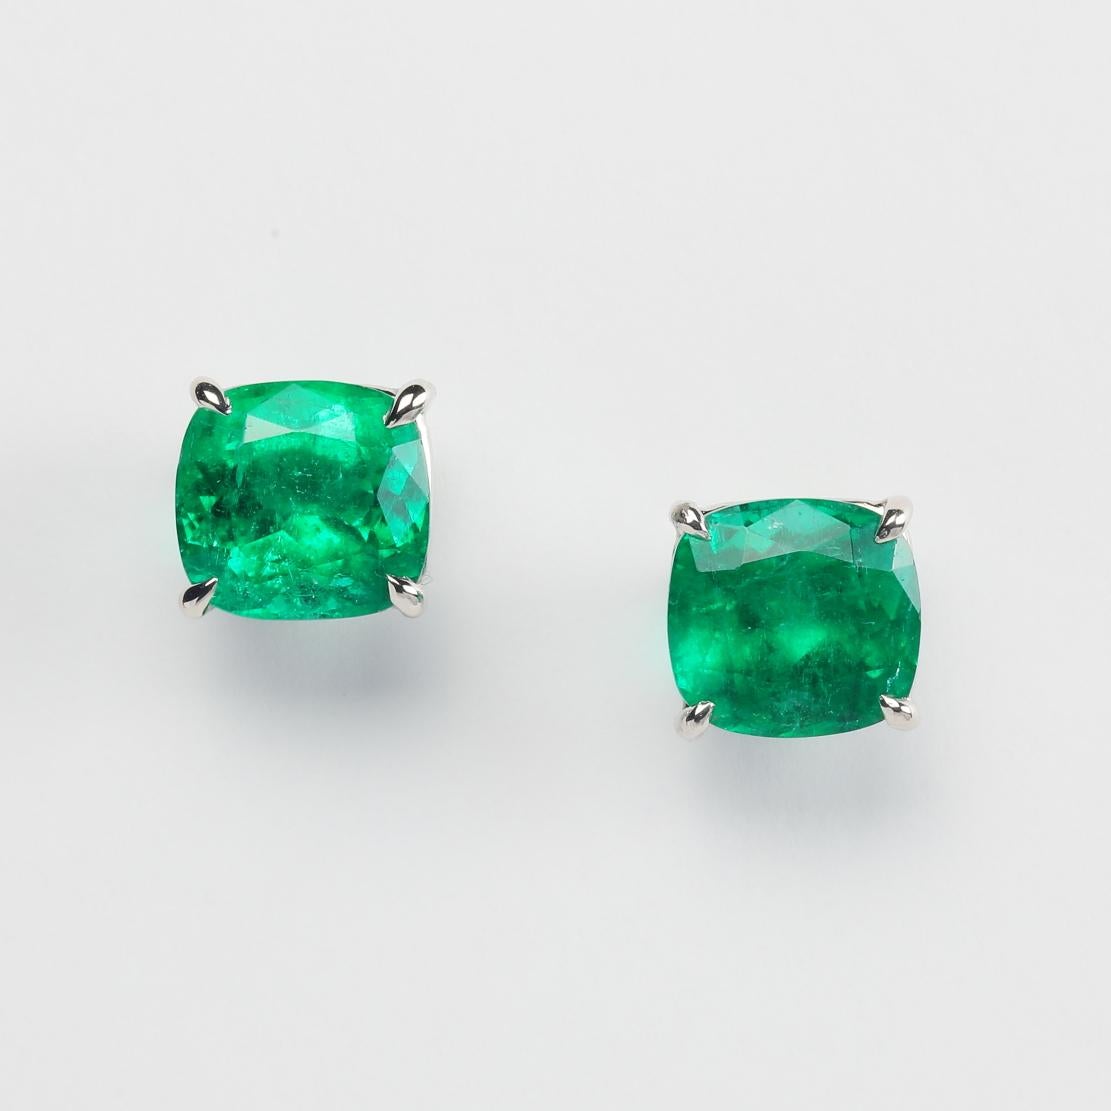 Exquisite Unheated Colombian Green Emerald Stud Earrings, featuring:
✧ 2 natural, unheated Colombian emeralds weighing 6.35 carats
✧ Friction posts with push-backs closures 
✧ Approximately 1.50 grams of 14K White Gold 
✧ Free appraisal included